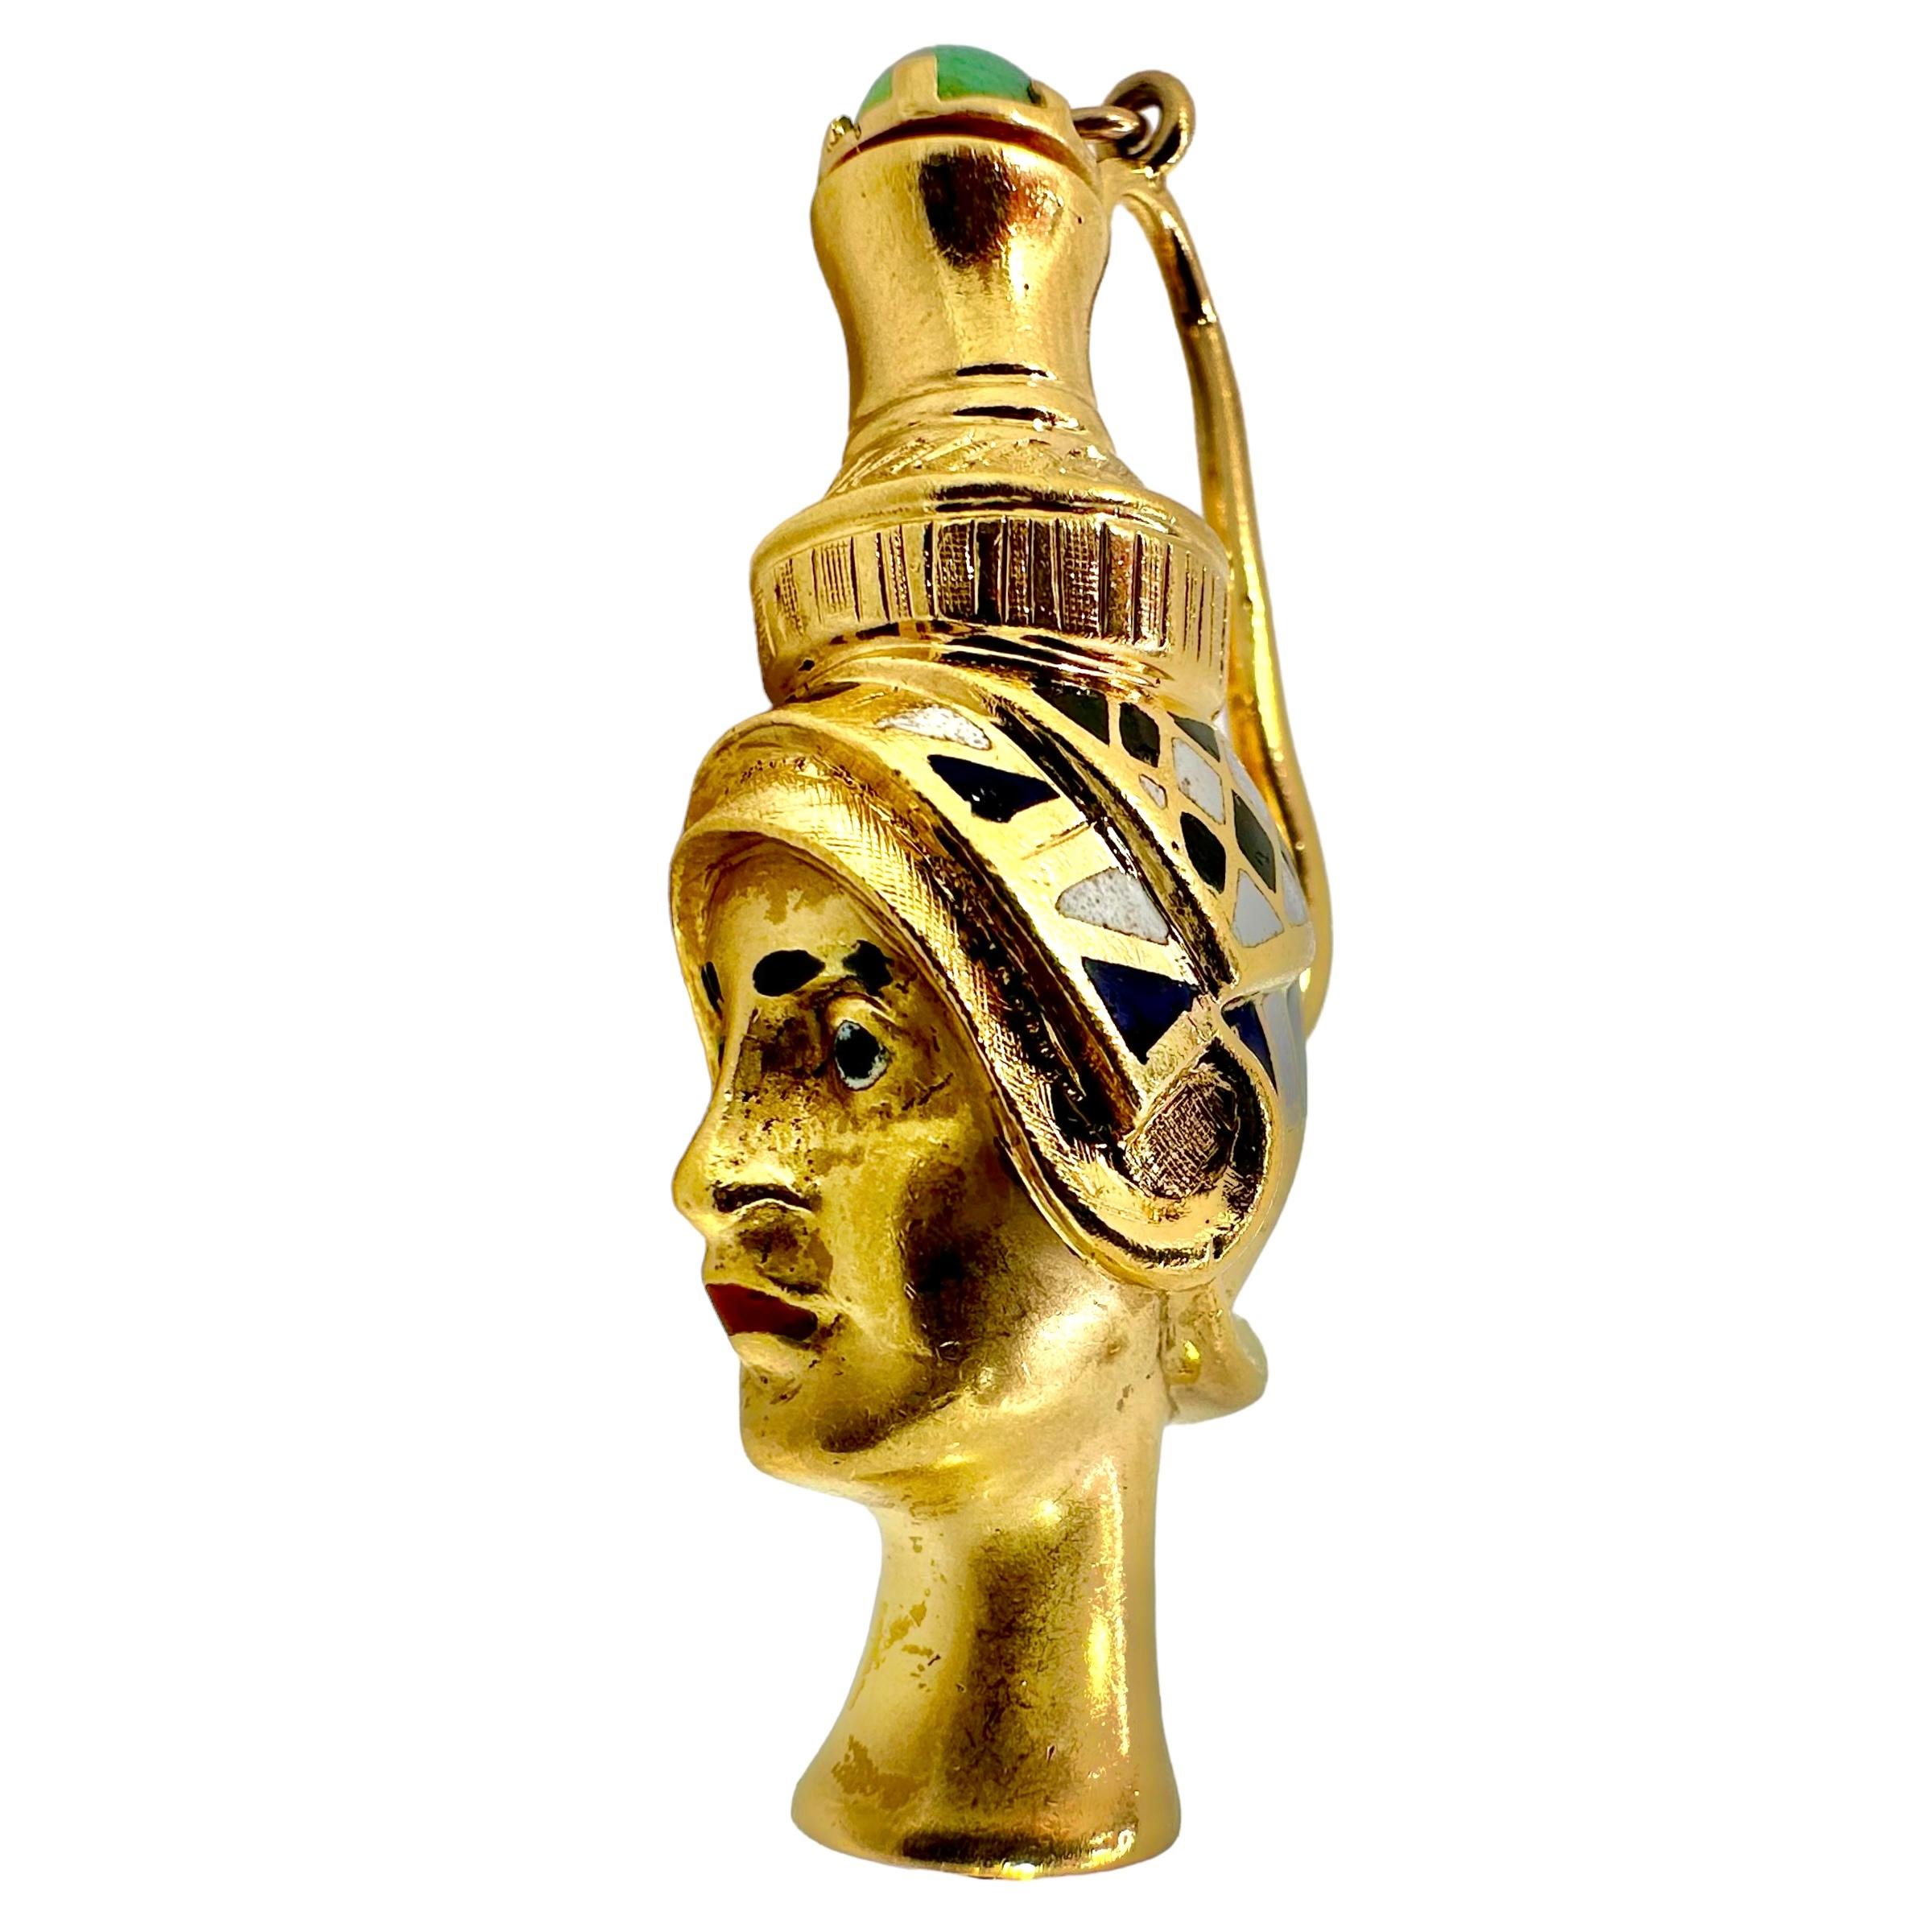 This very imaginative and artistically crafted Italian Mid-20th Century perfume amulet is in the form of an ancient Egyptian head. The beautiful caricature of a high priestess or Pharaoh is adorned with vibrant red, black and white enamel. The